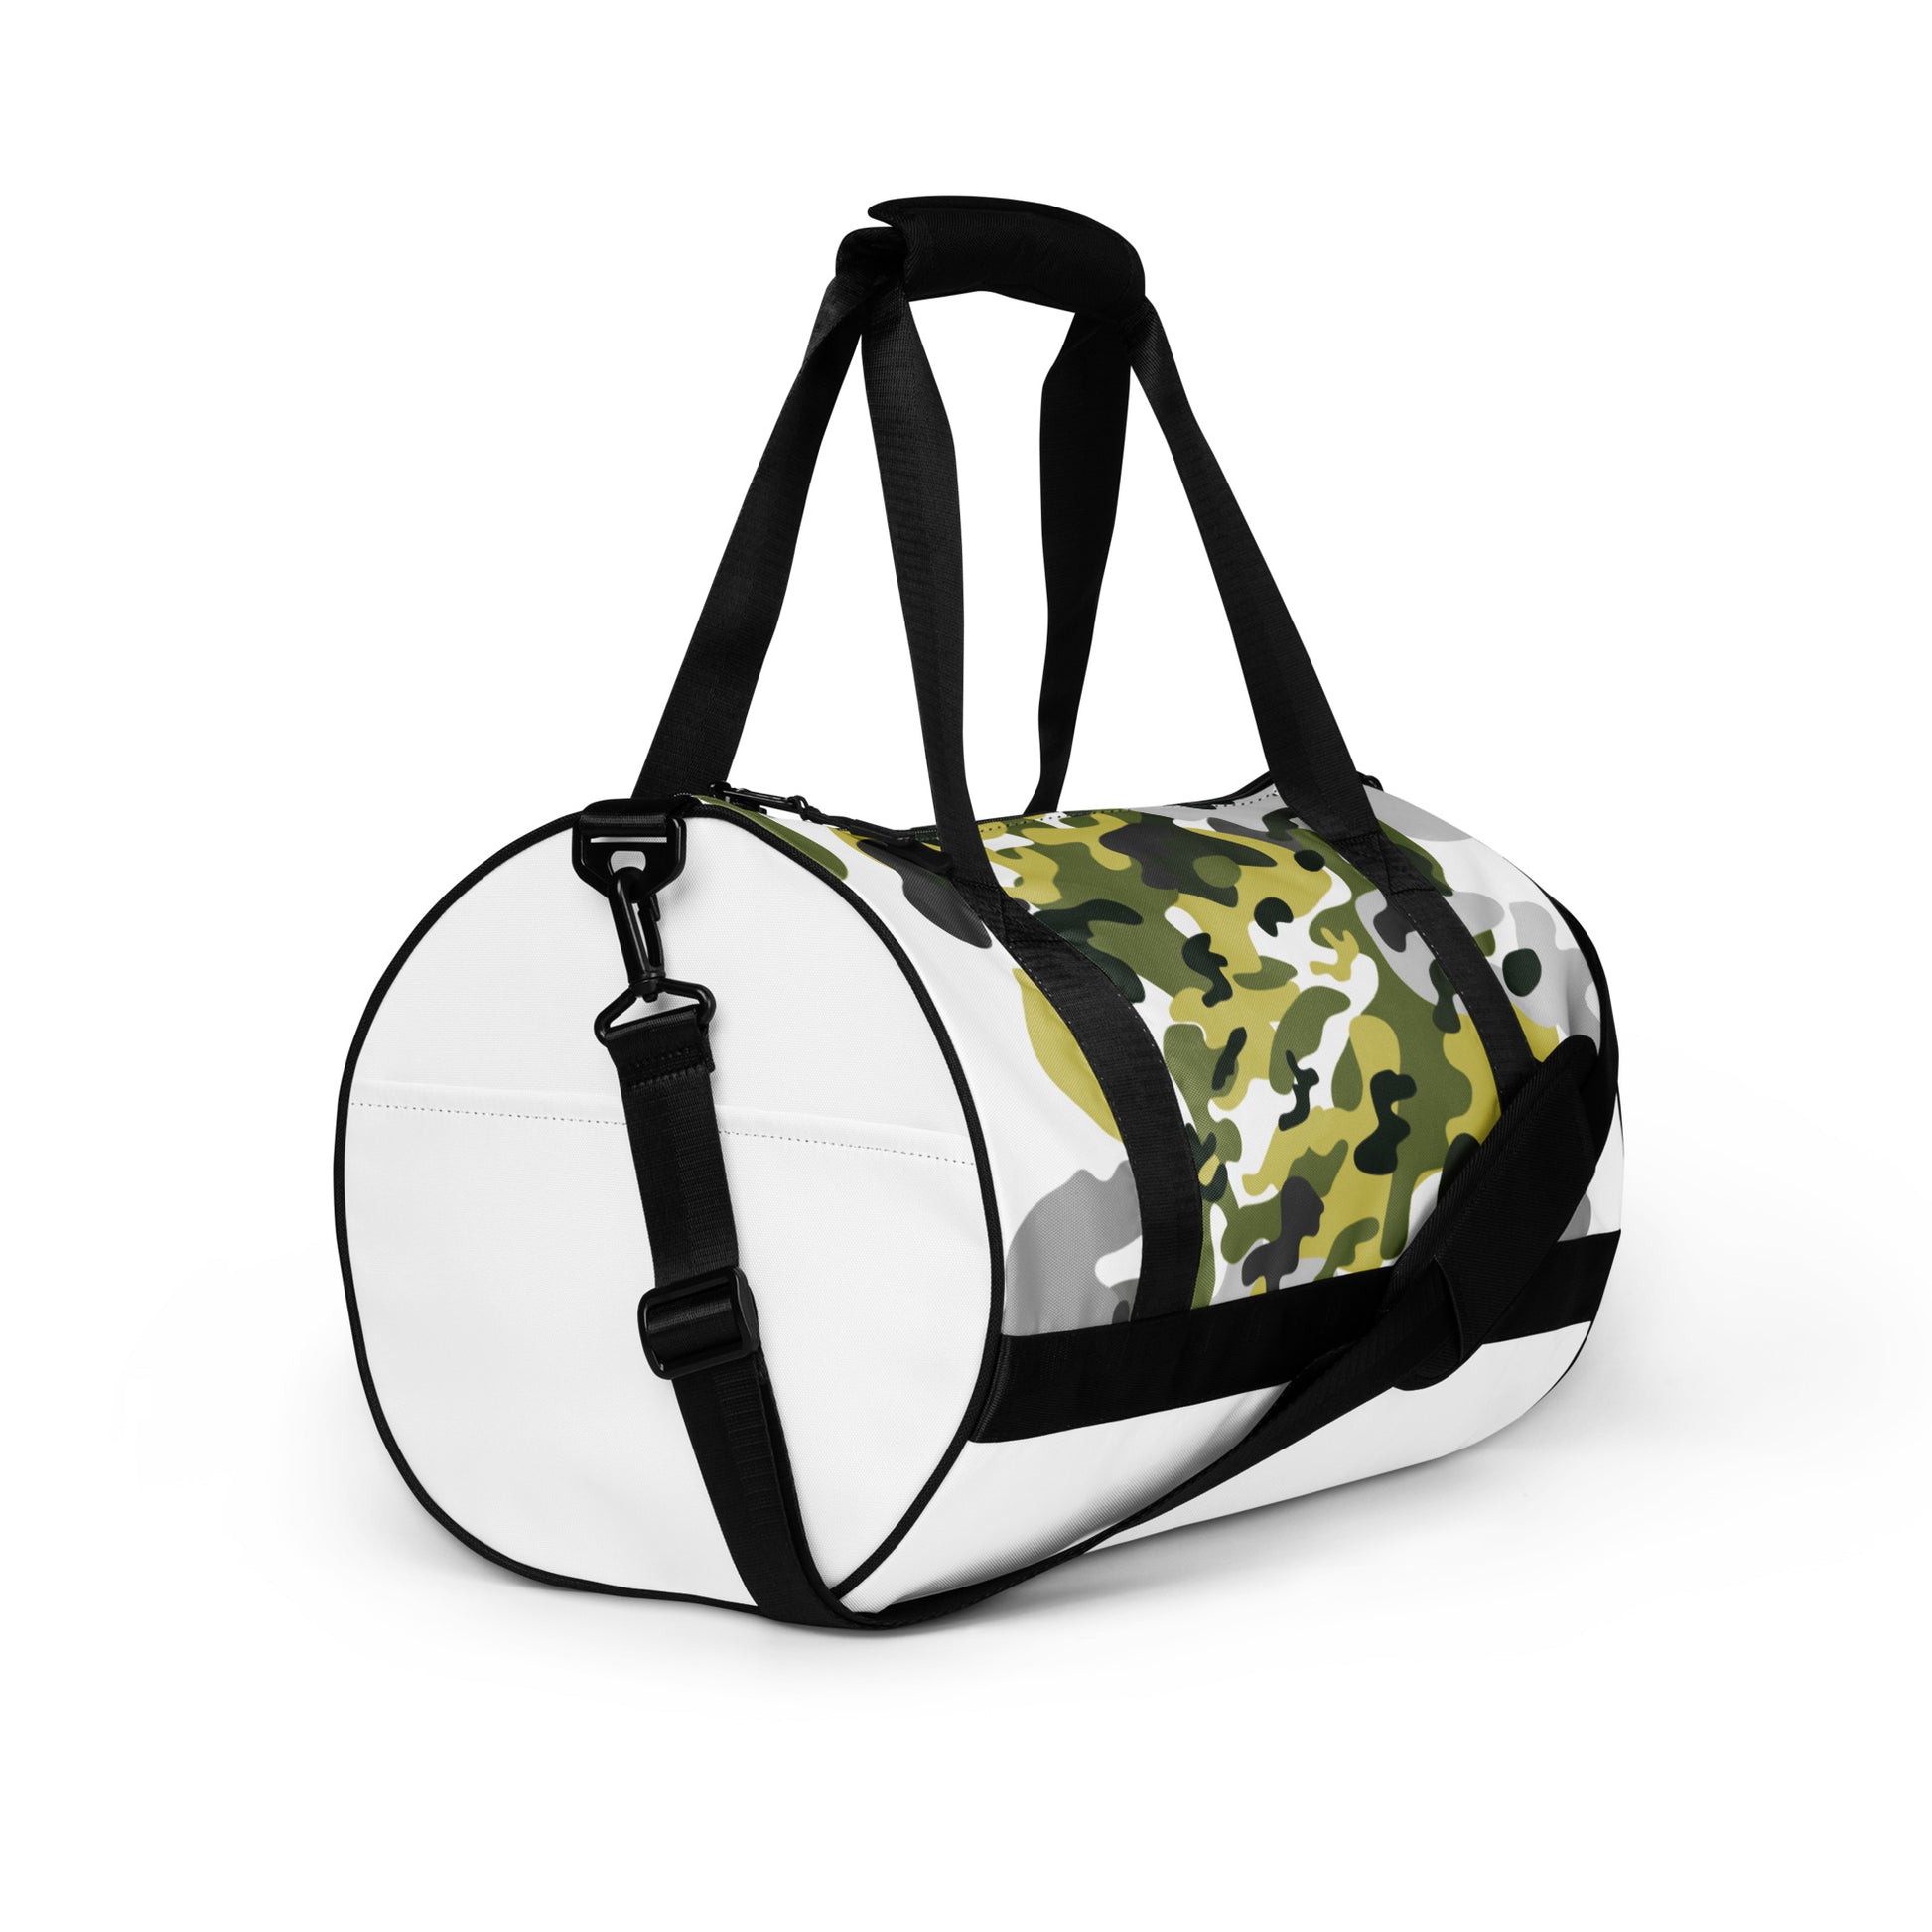 TIME OF VIBES - Sports Bag CAMOUFLAGE (White/Grey/Green) - €82.00